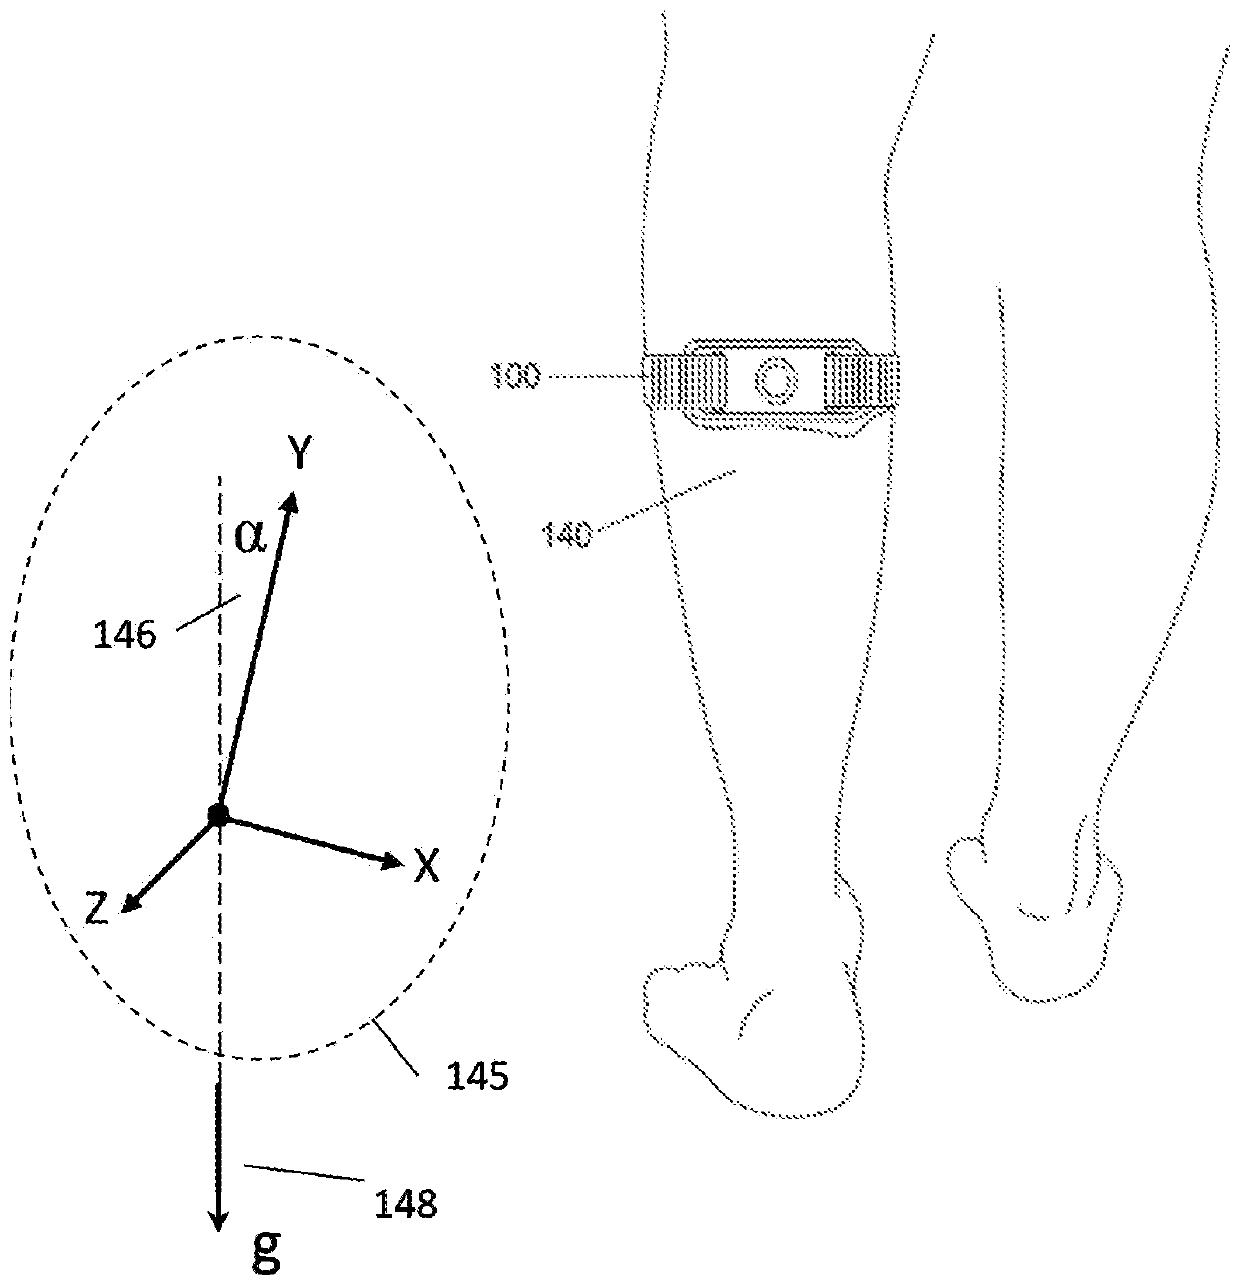 A tens device for activity monitoring, gait analysis, and balance assessment